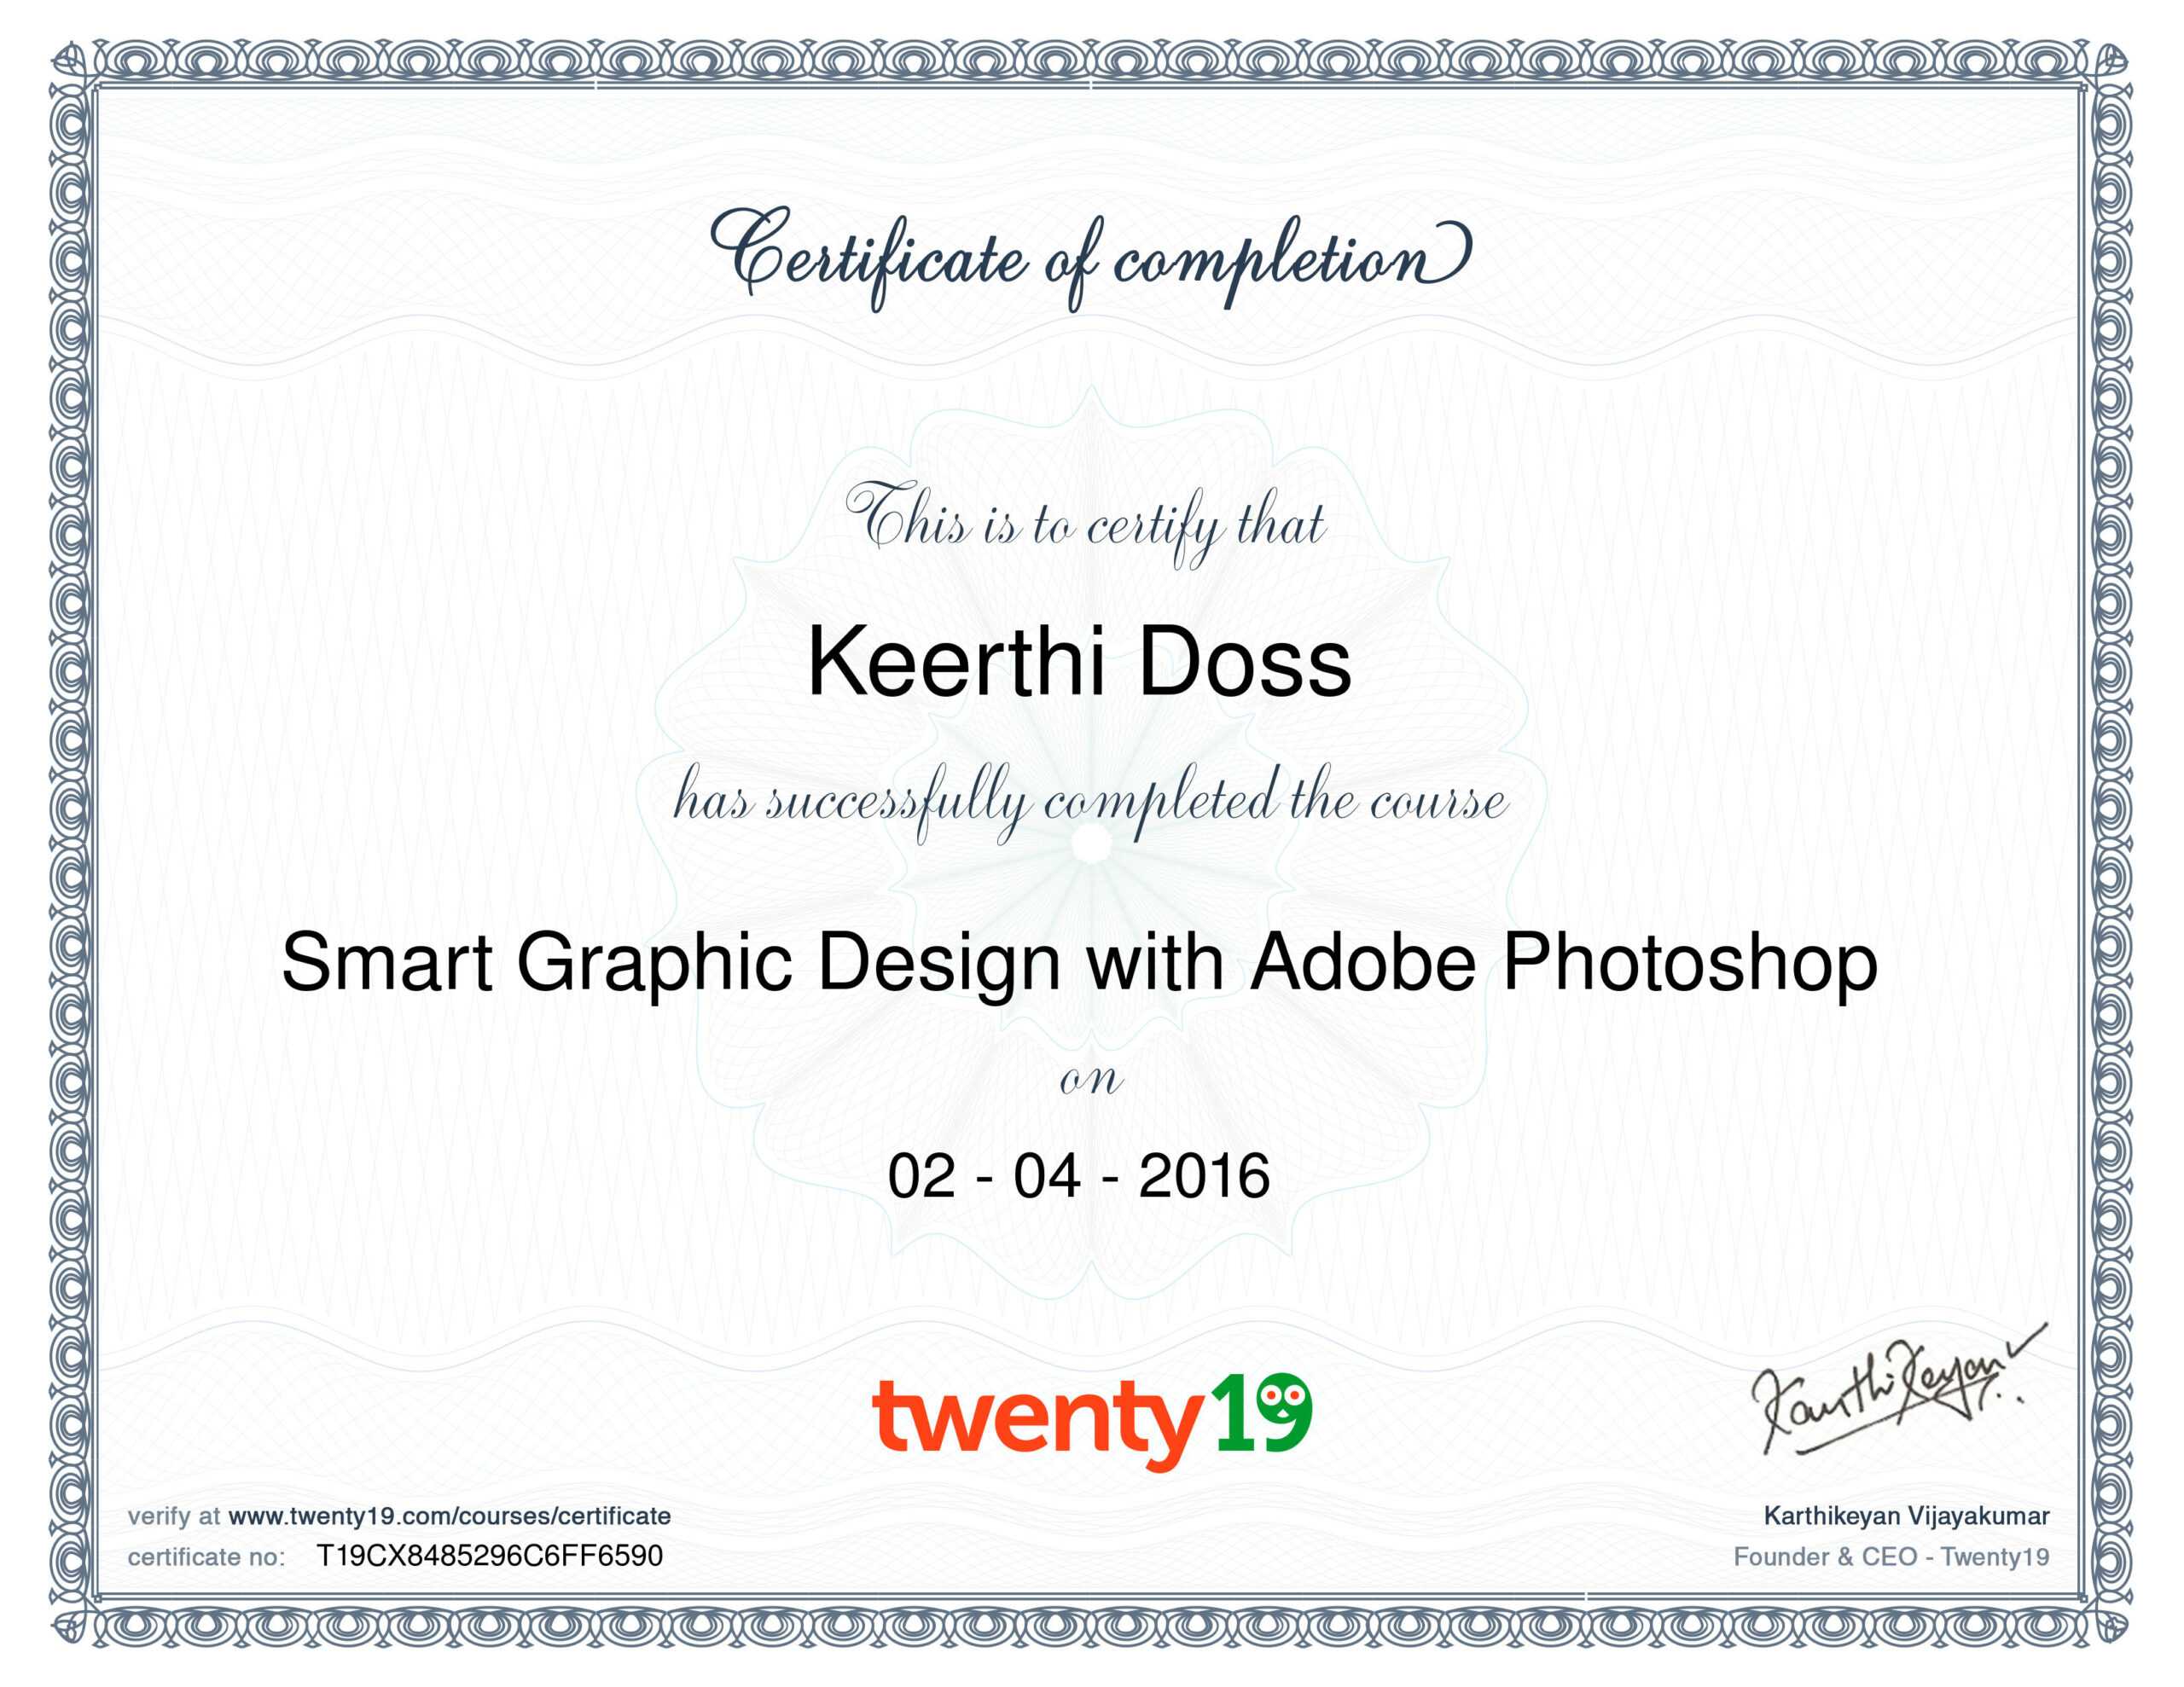 Adobe Photoshop Certificates | Certificate Template Downloads Within Track And Field Certificate Templates Free